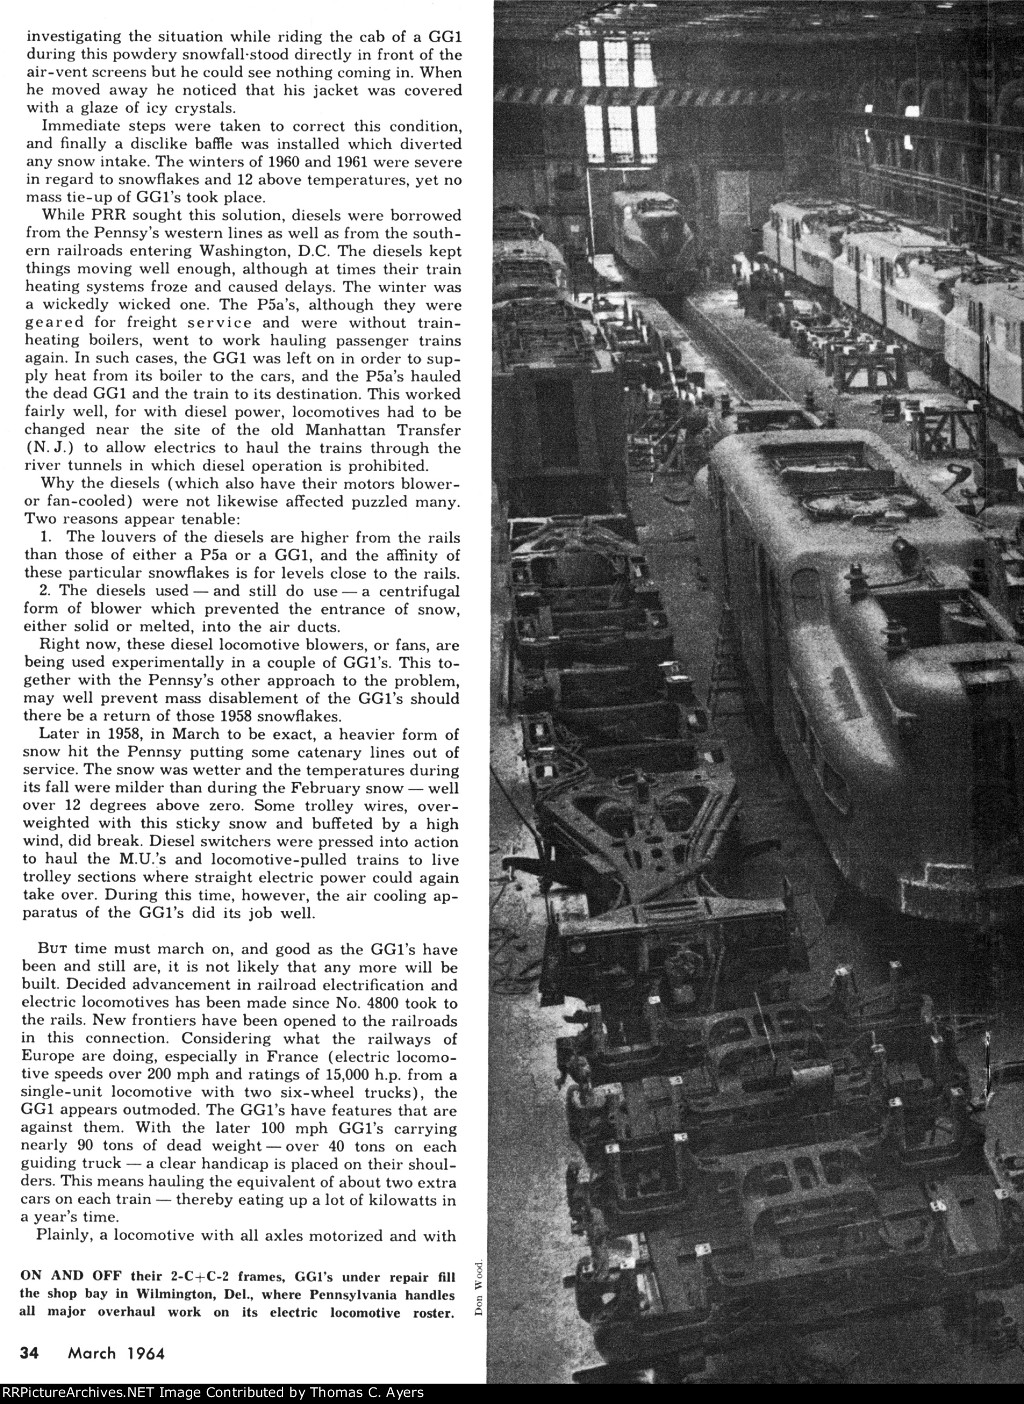 Story Of The GG-1, Page 34, 1964